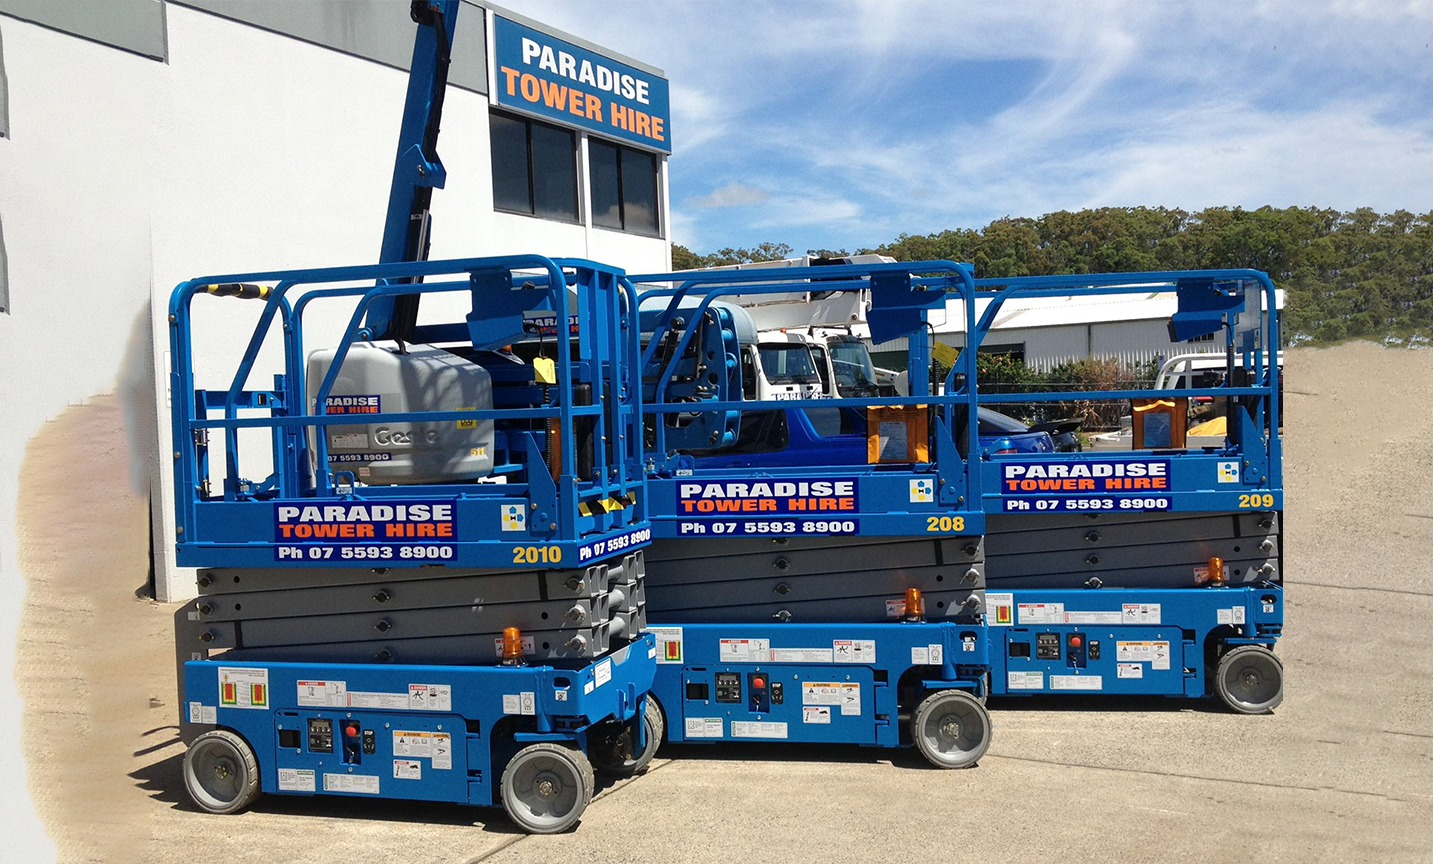 The best type of Scissor lift service for your needs on the Gold Coast